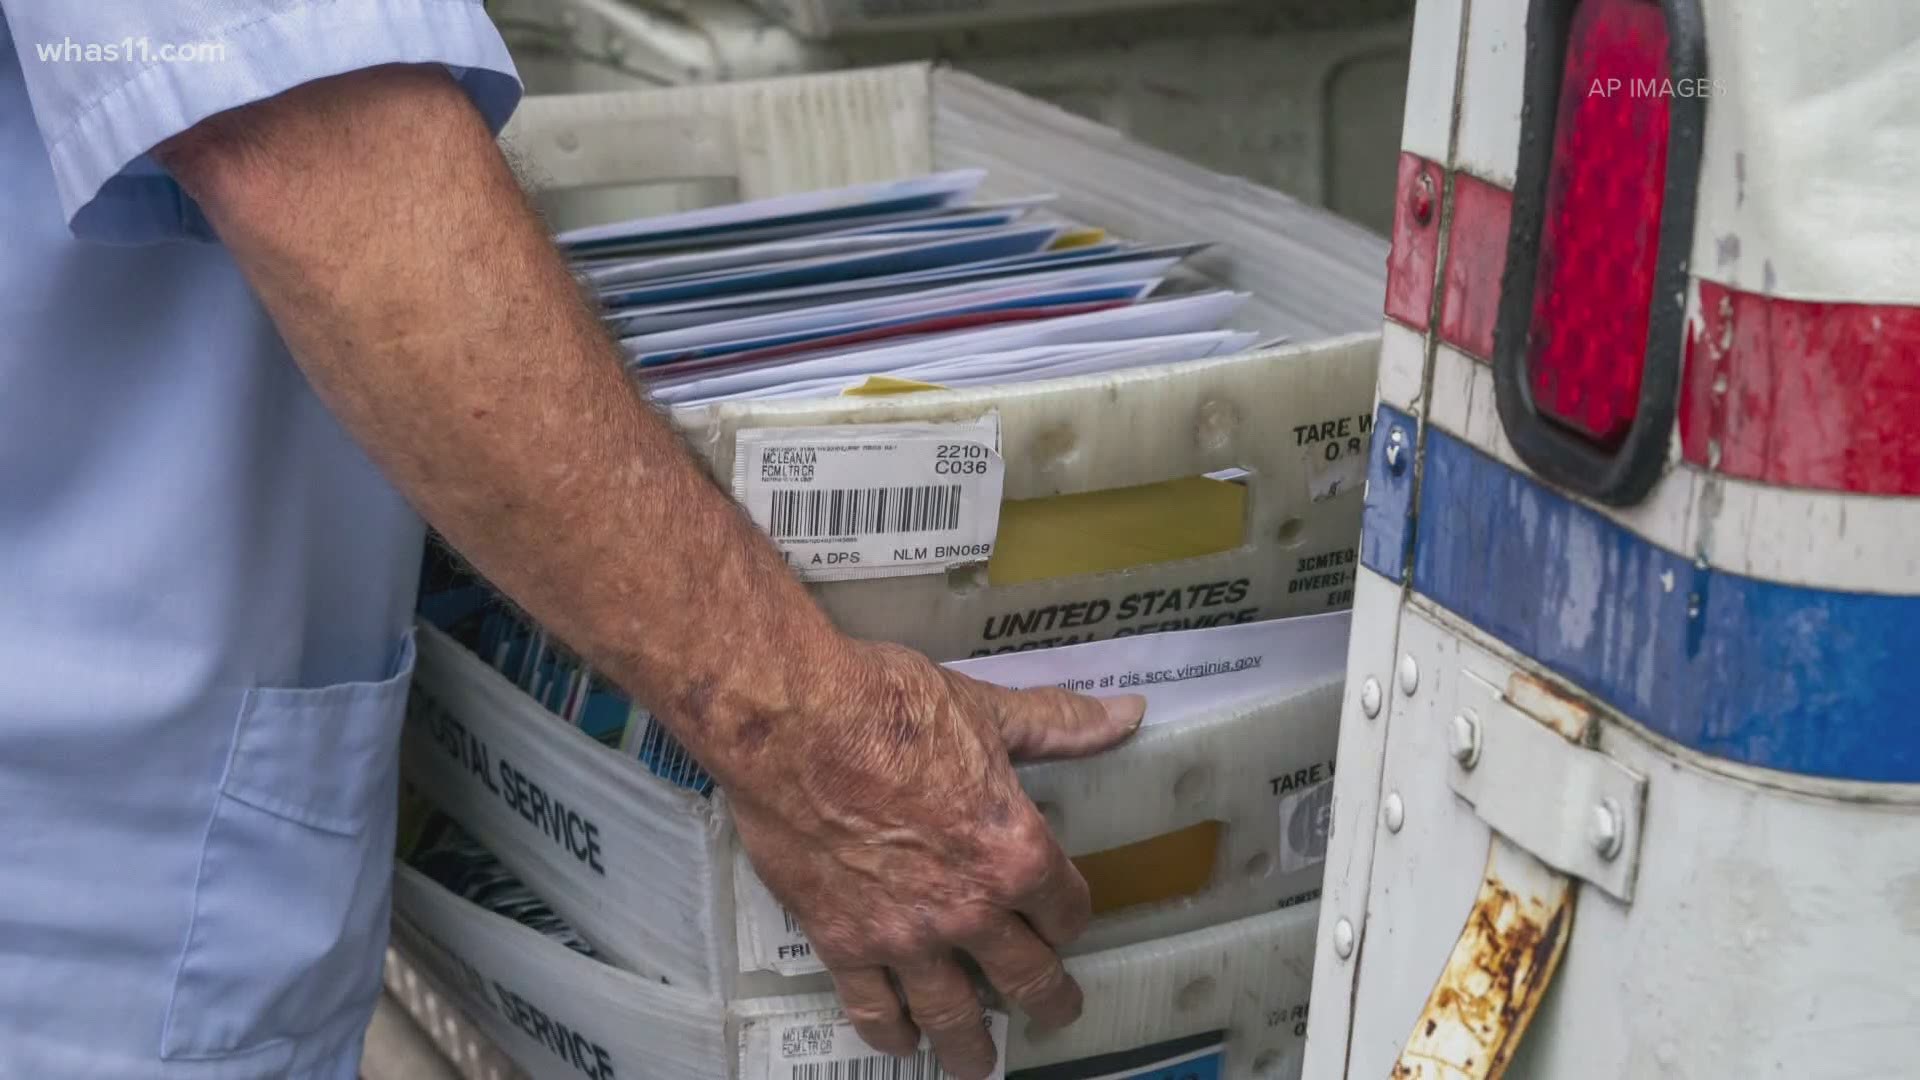 Post offices around the country are feeling the effects of changes made by the new Postmaster General who has cut hours, changed mail transportation...